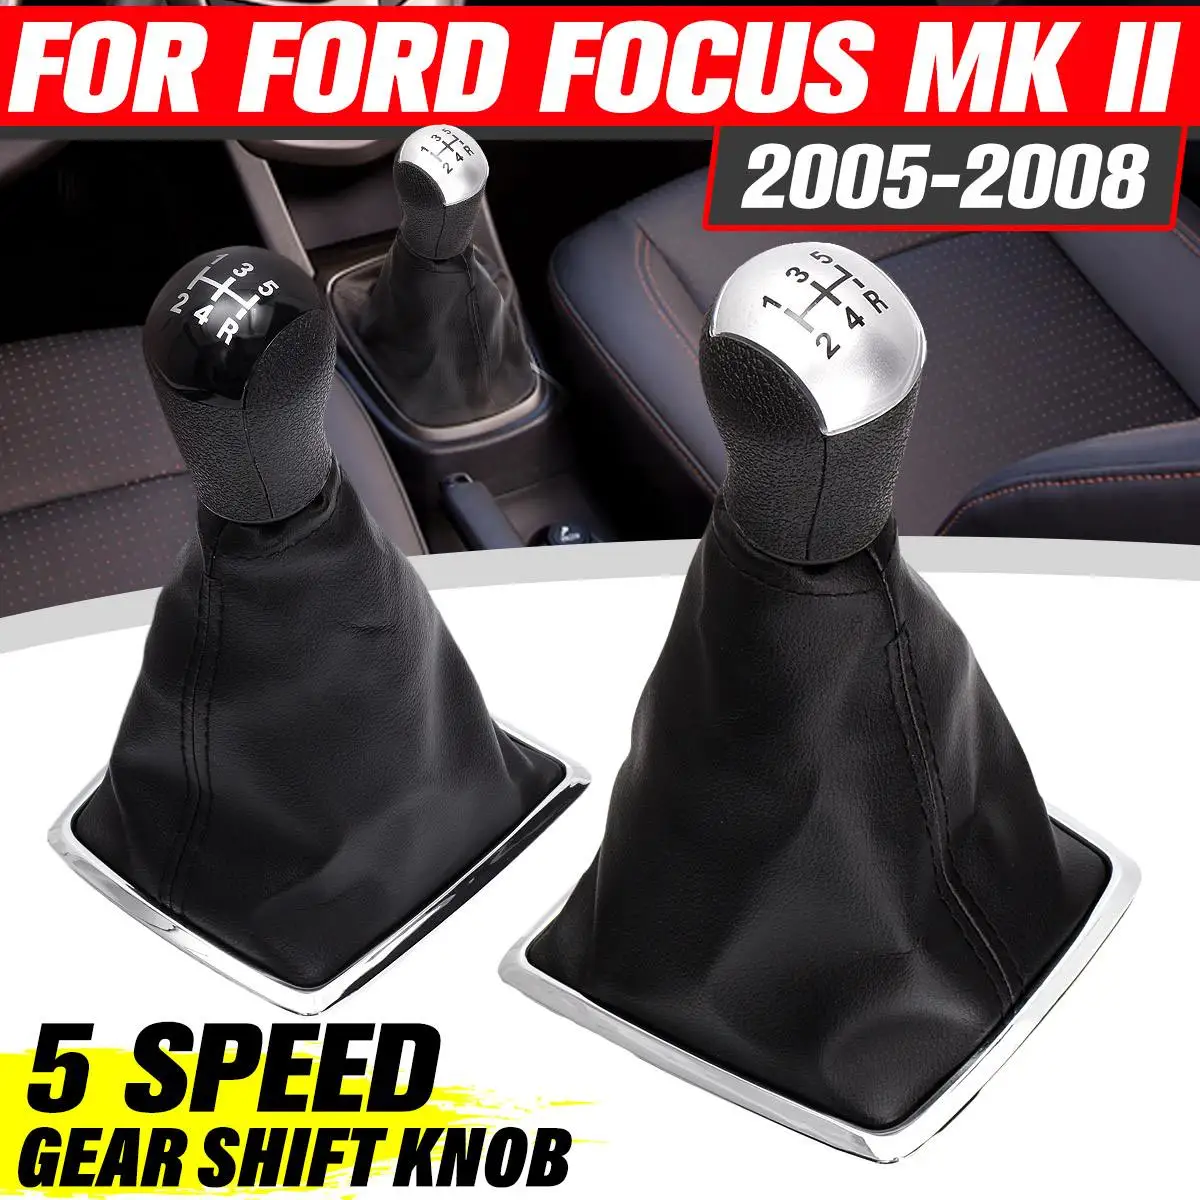 

5 Speed Manual Gear Shift Knob PU Leather Gaiter Boot Cover For Ford/Focus 2 MK II 2005 2006 2007 2008 2009 2010 2011